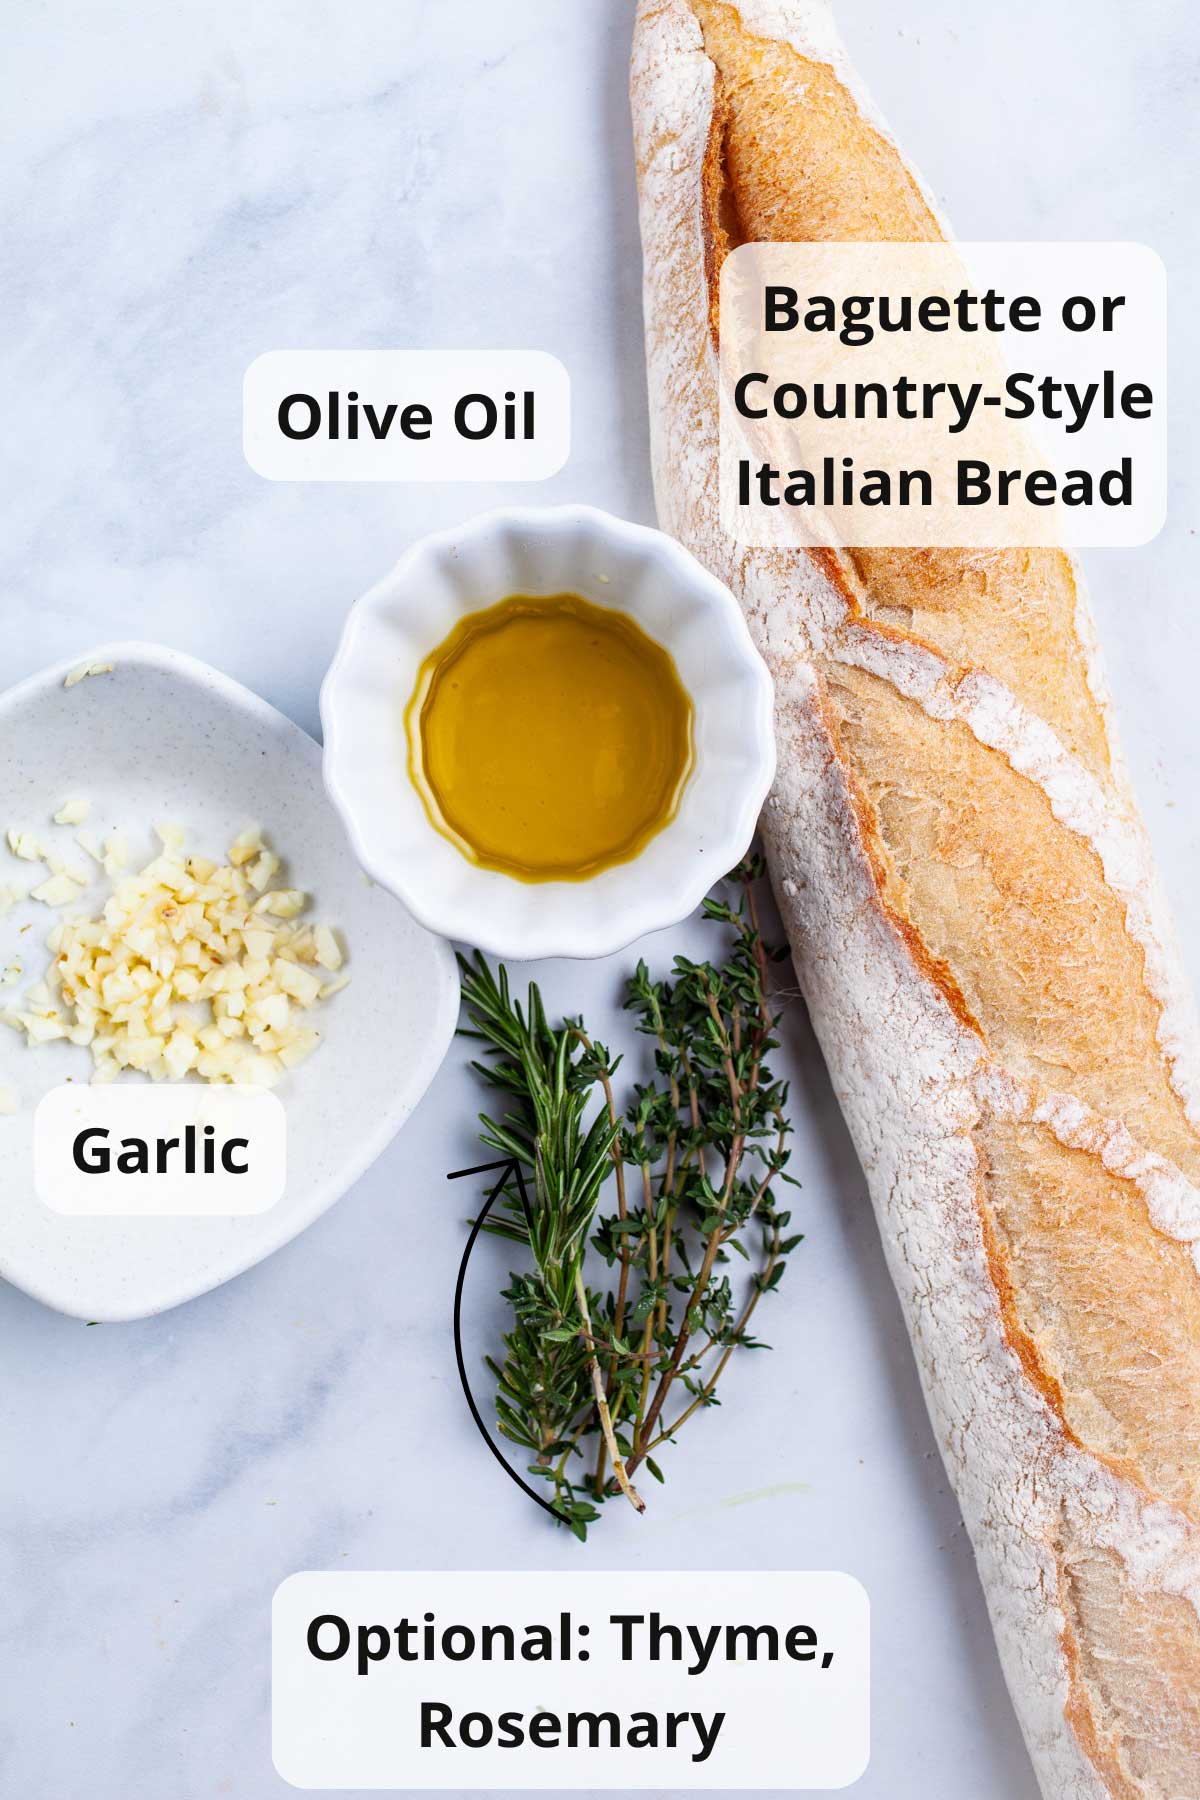 Ingredients: Olive oil, baguette, garlic, thyme, rosemary to make garlic crostini displayed on a table.